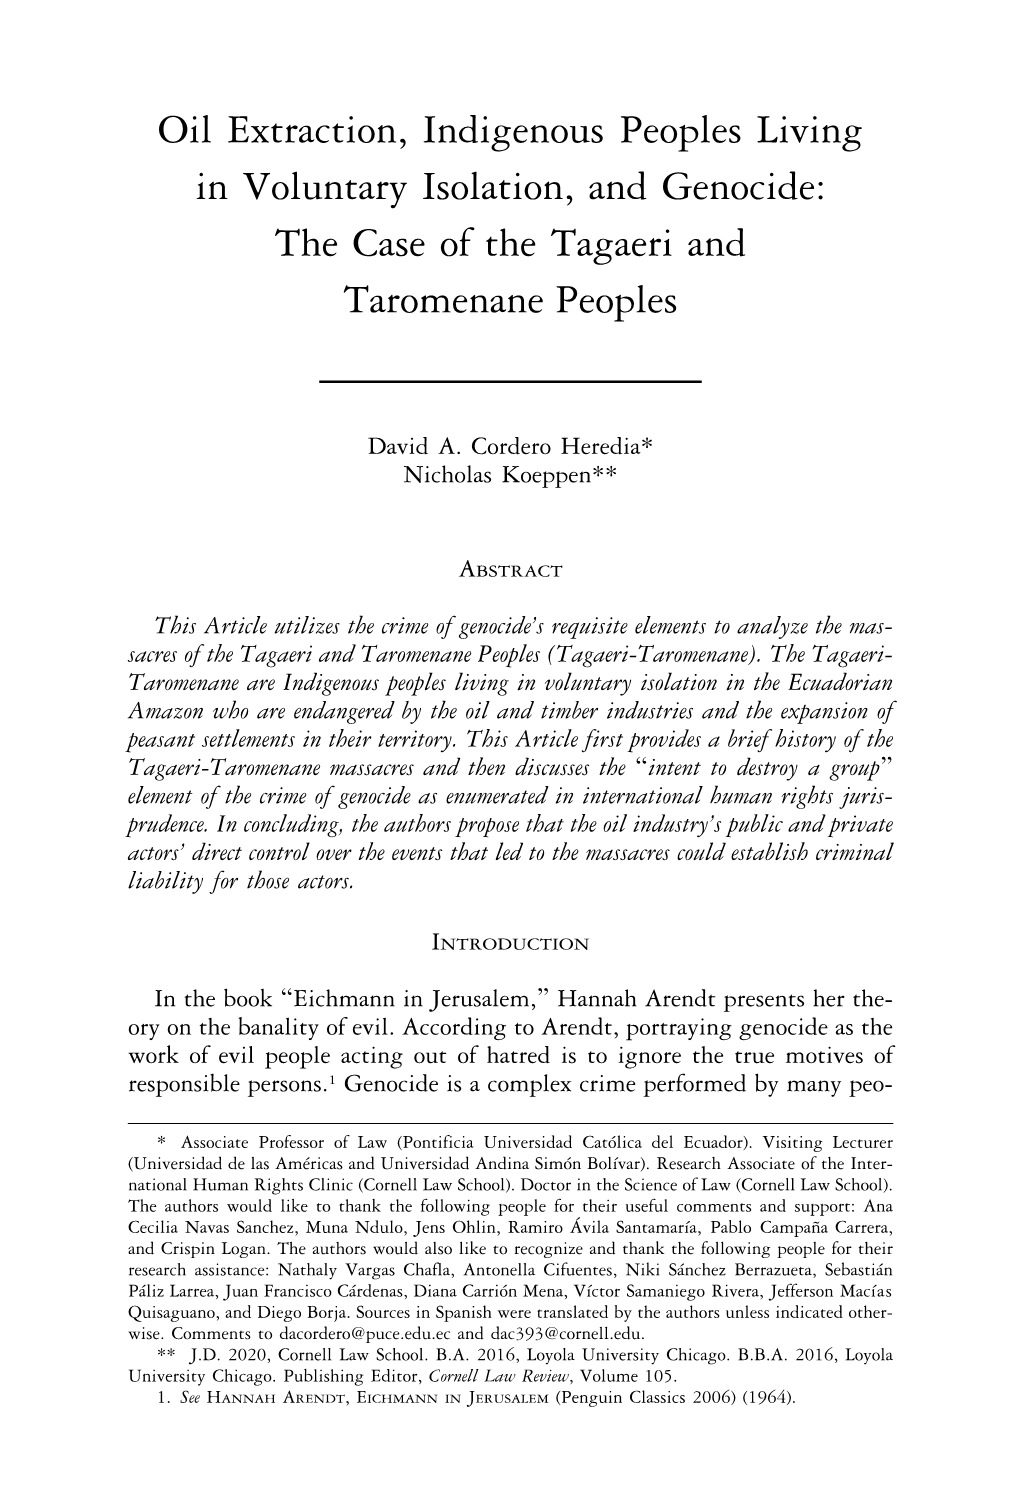 Oil Extraction, Indigenous Peoples Living in Voluntary Isolation, and Genocide: the Case of the Tagaeri and Taromenane Peoples